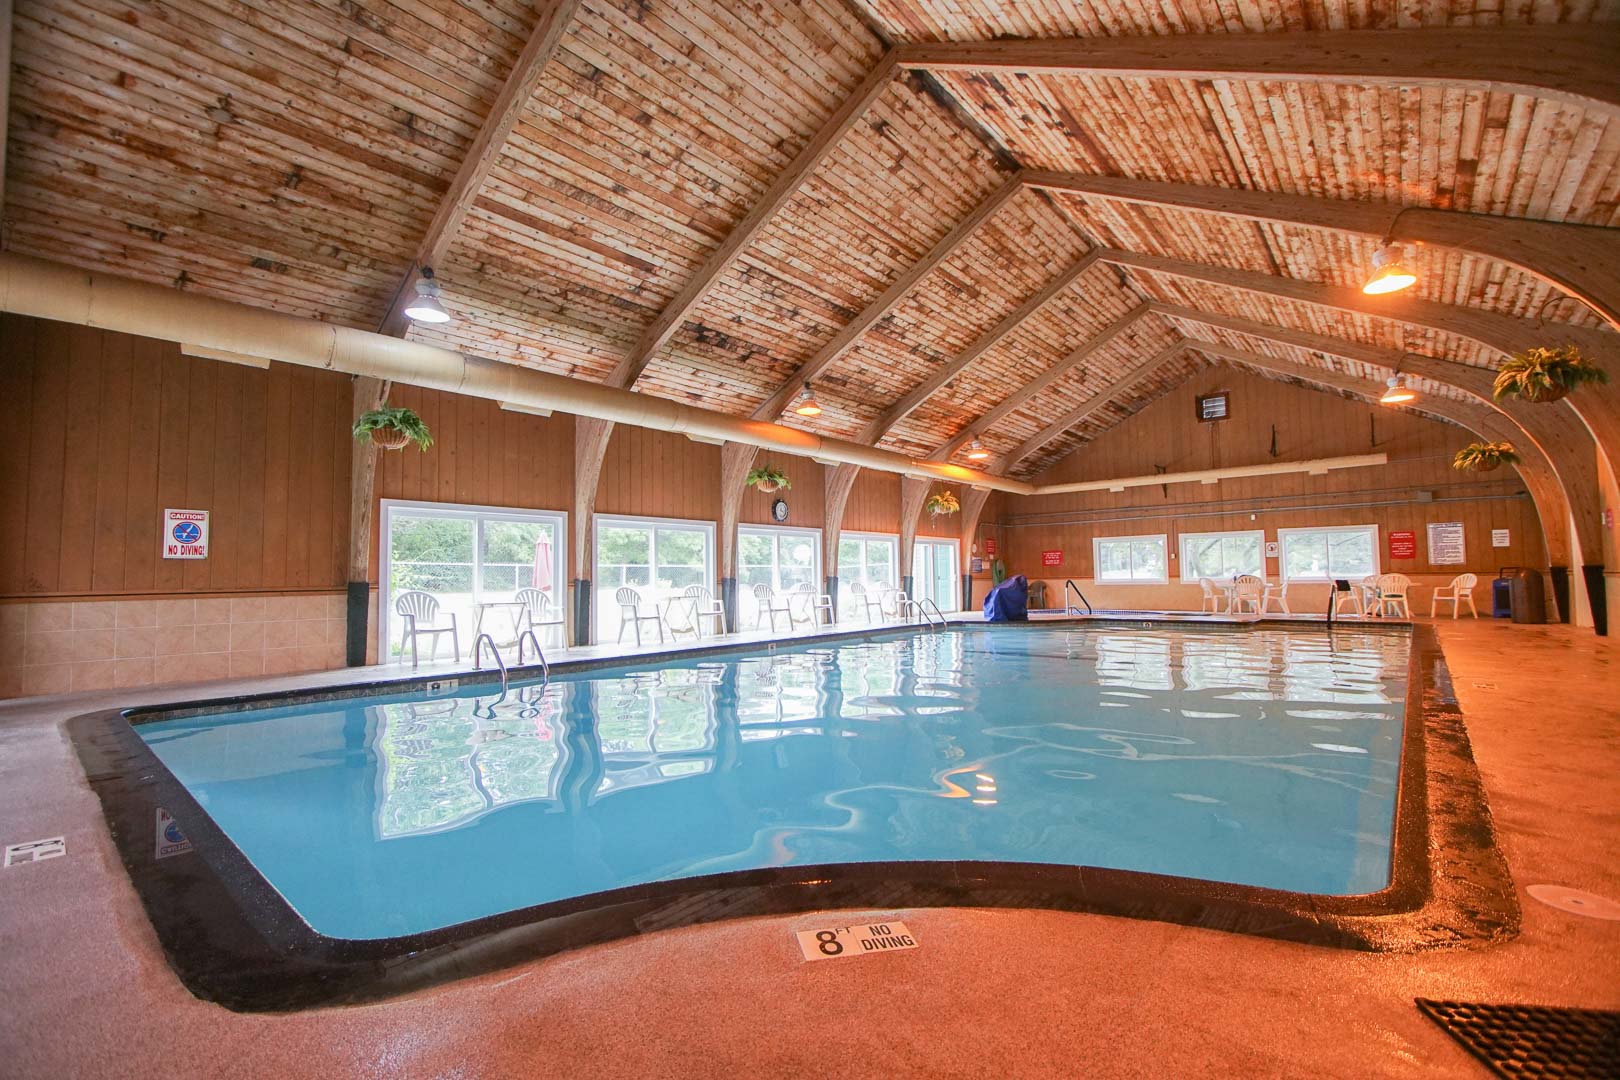 An expansive indoor swimming pool at VRI's Brewster Green Resort in Massachusetts.